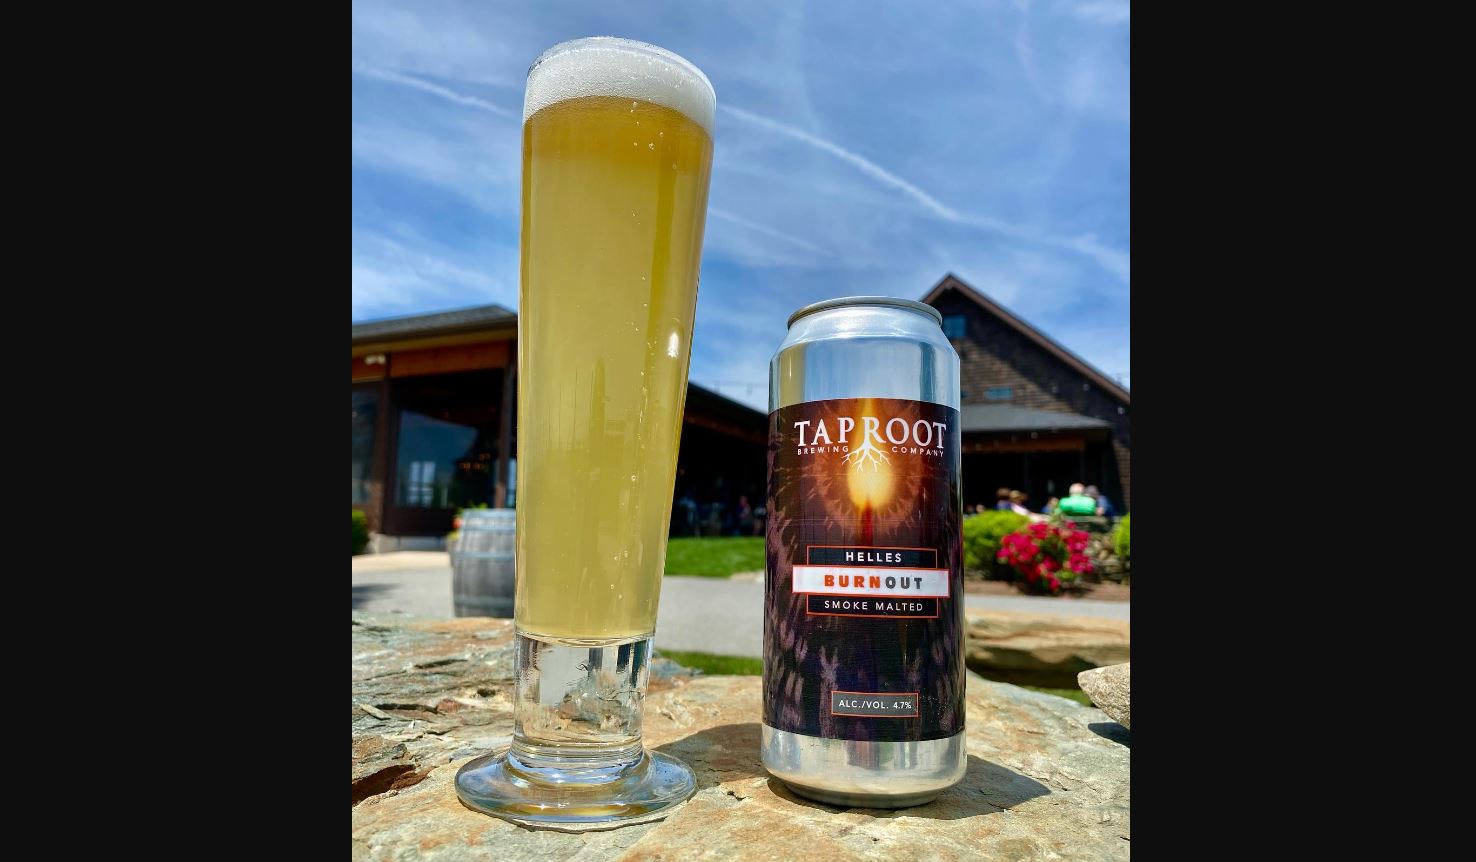 Taproot Burnout Smoked Helles